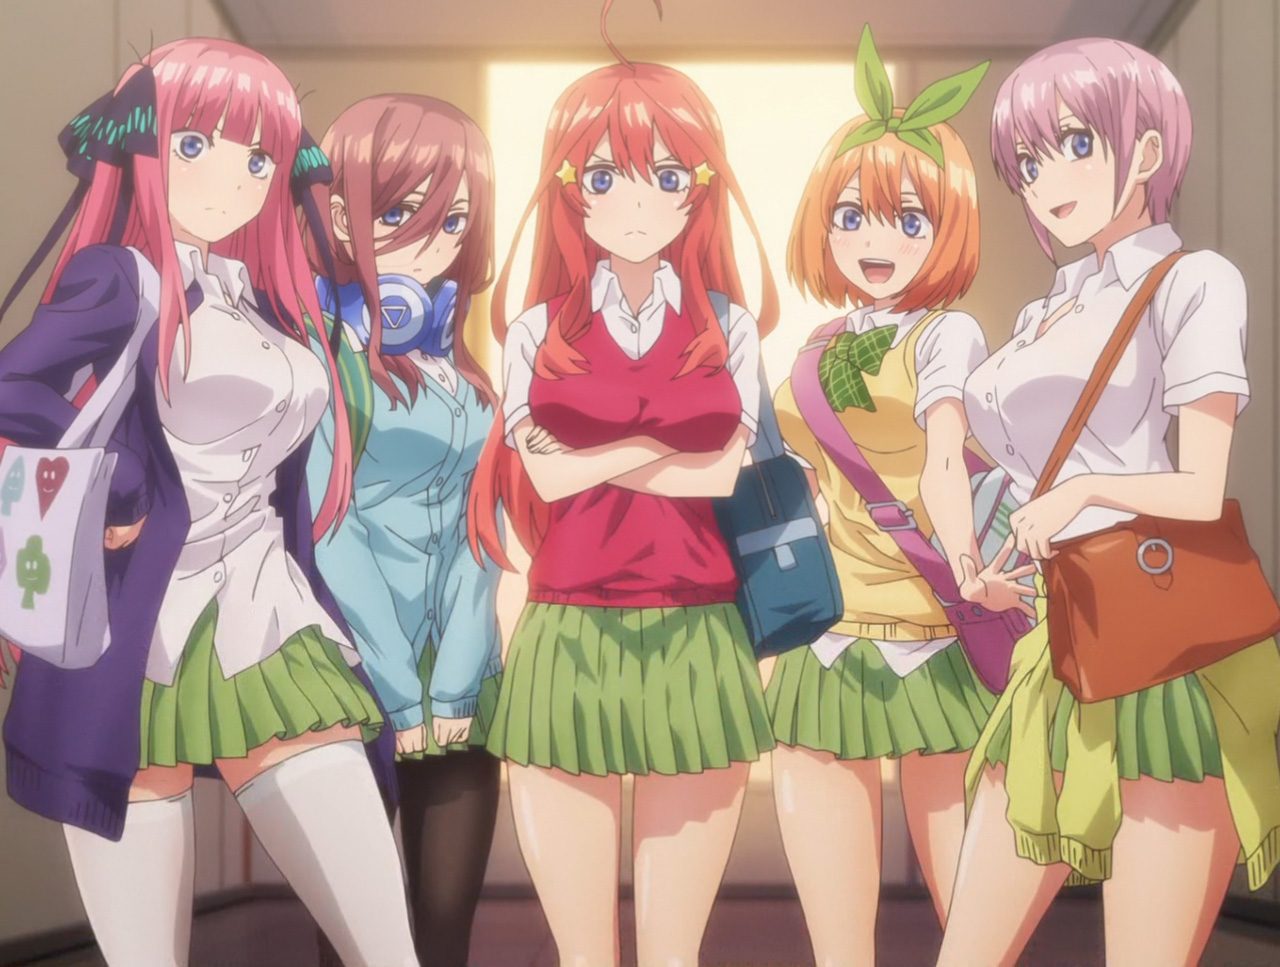 3. Miku Nakano from The Quintessential Quintuplets - wide 2